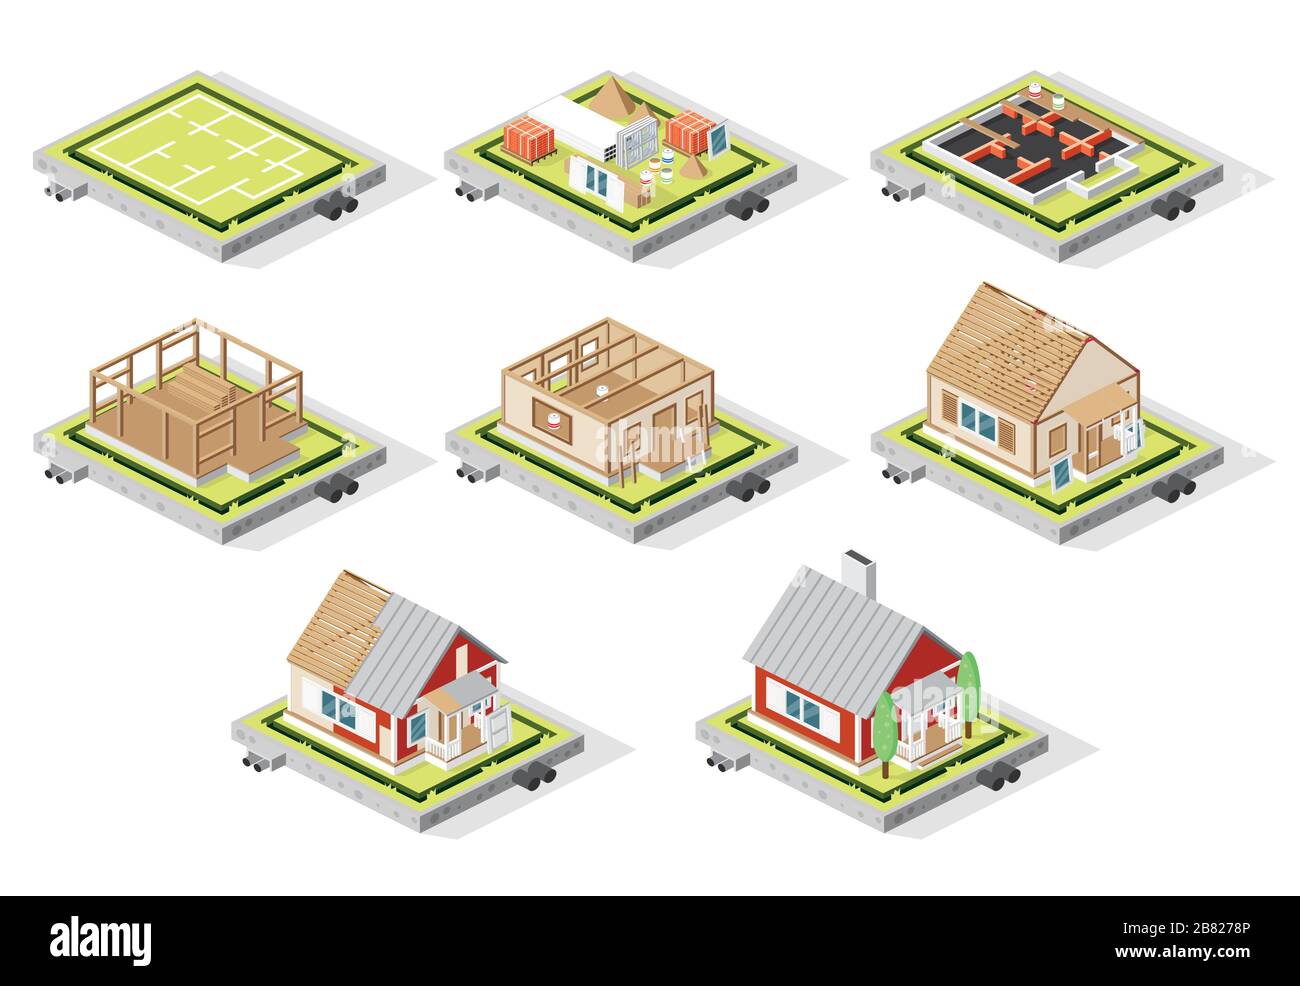 Isometric House Construction Phases Isolated on White. Vector Illustration. Stages from Plan to Finished Building. Stock Vector